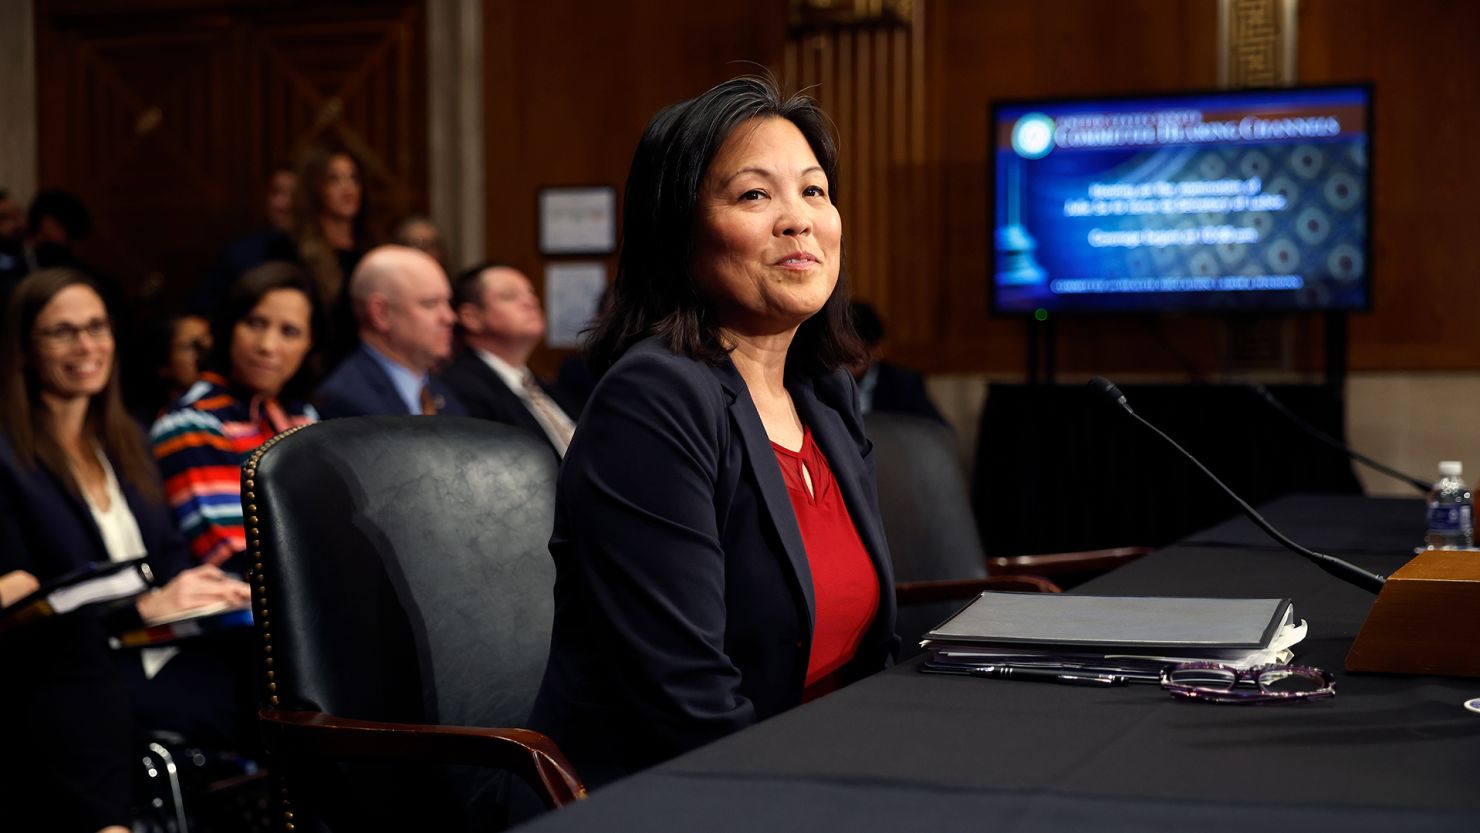 Deputy Labor Secretary Julie Su prepares to testify before the Senate Health, Education, Labor and Pensions Committee during her confirmation hearing to be the next secretary of the Labor Department in the Dirksen Senate Office Building on Capitol Hill on April 20 in Washington, DC.